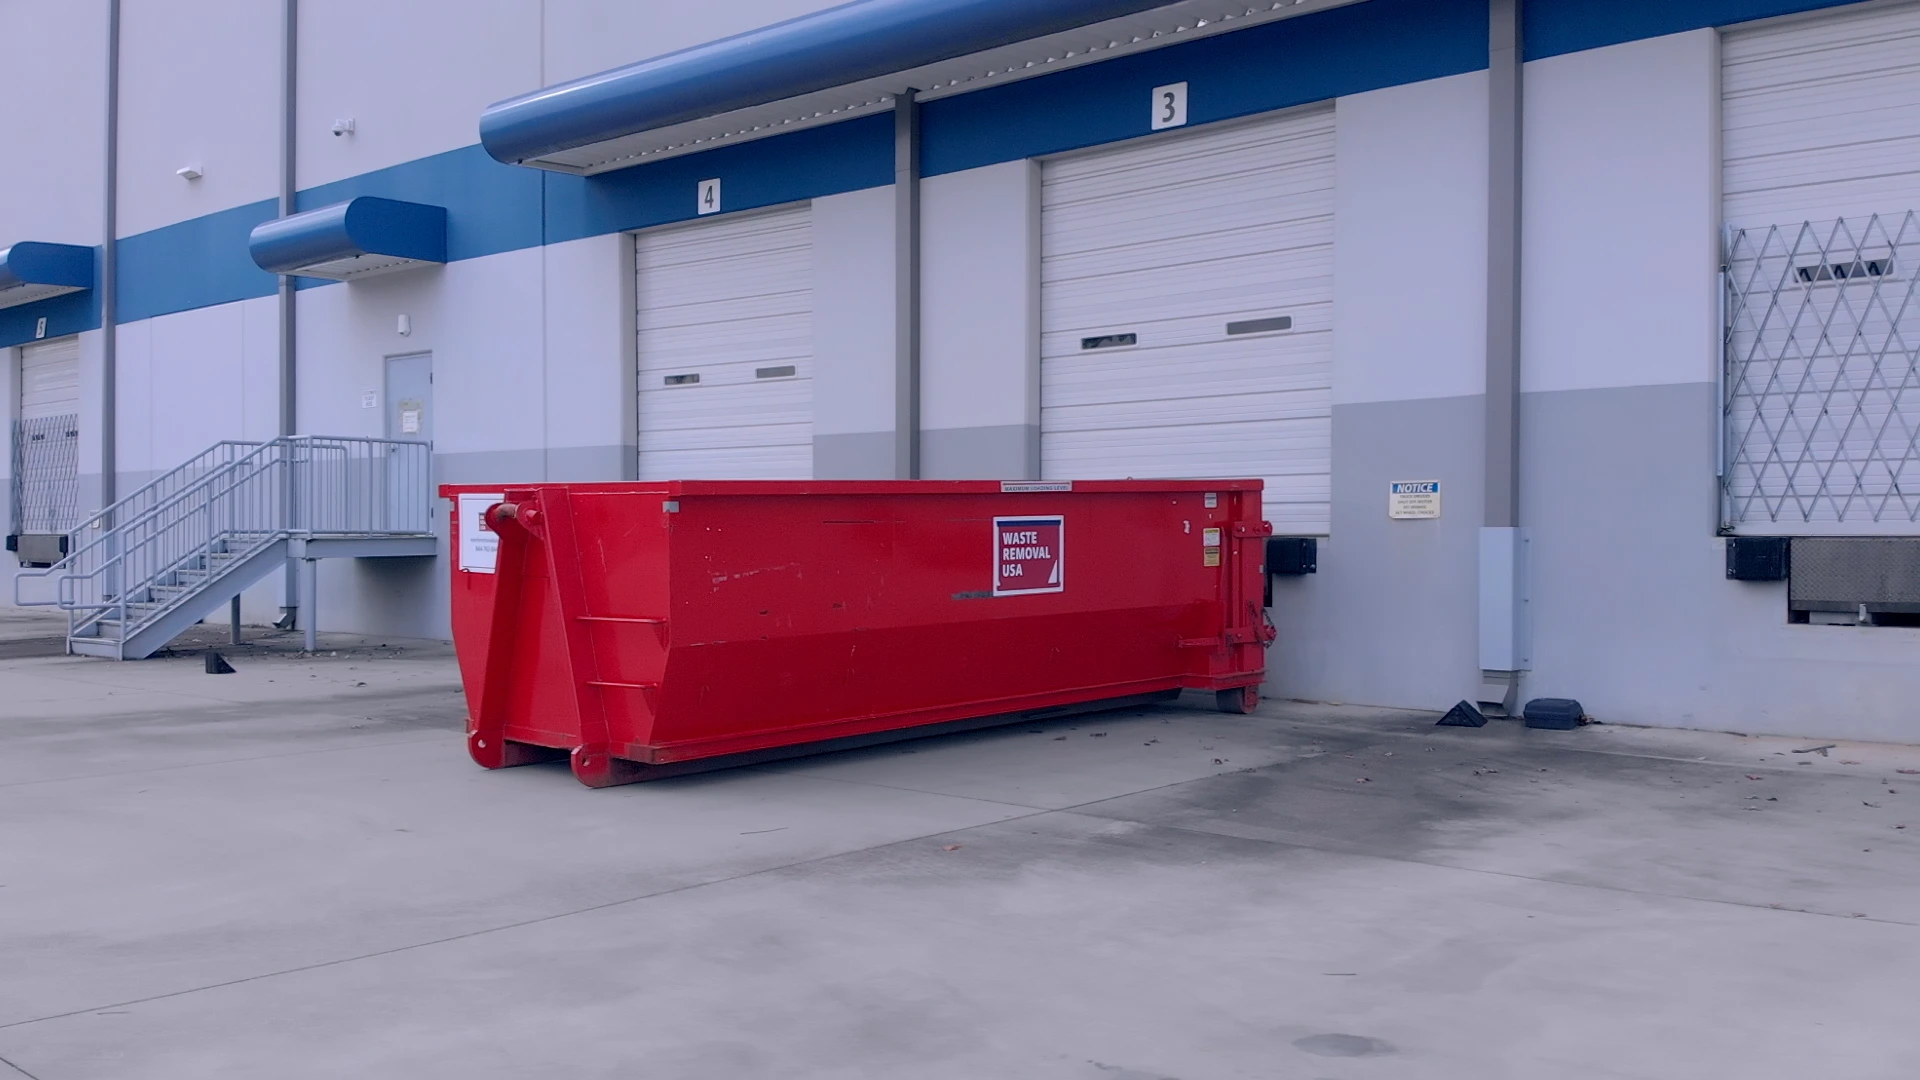 How Much Does a Dumpster Rental Cost?